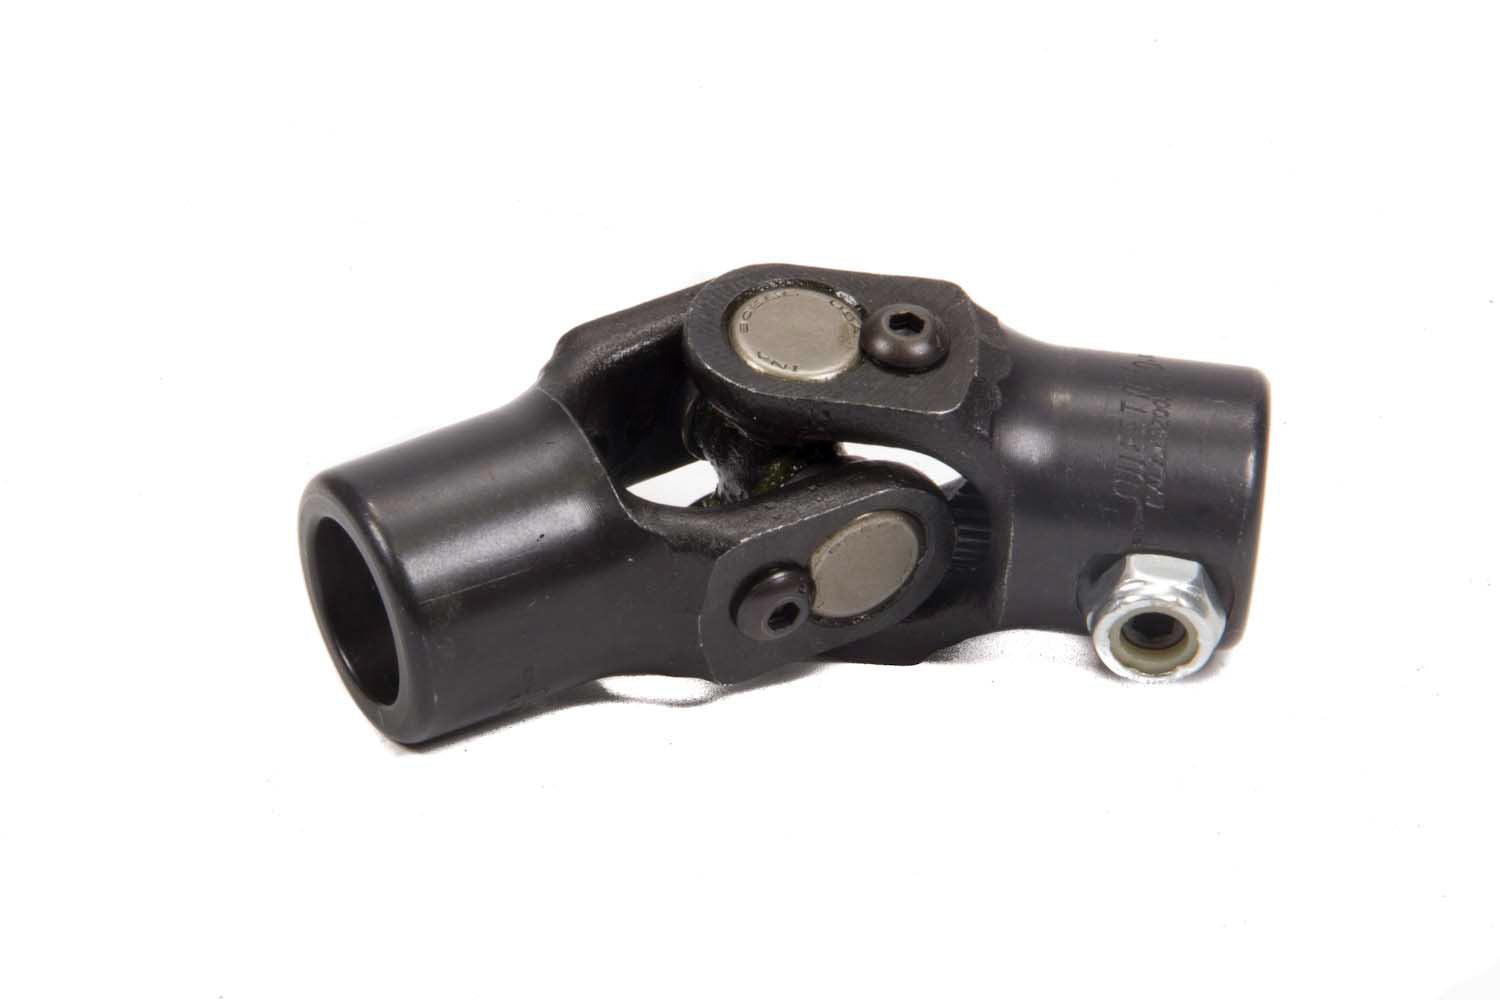 U-Joint 3/4-20 X 3/4 Smooth - Burlile Performance Products